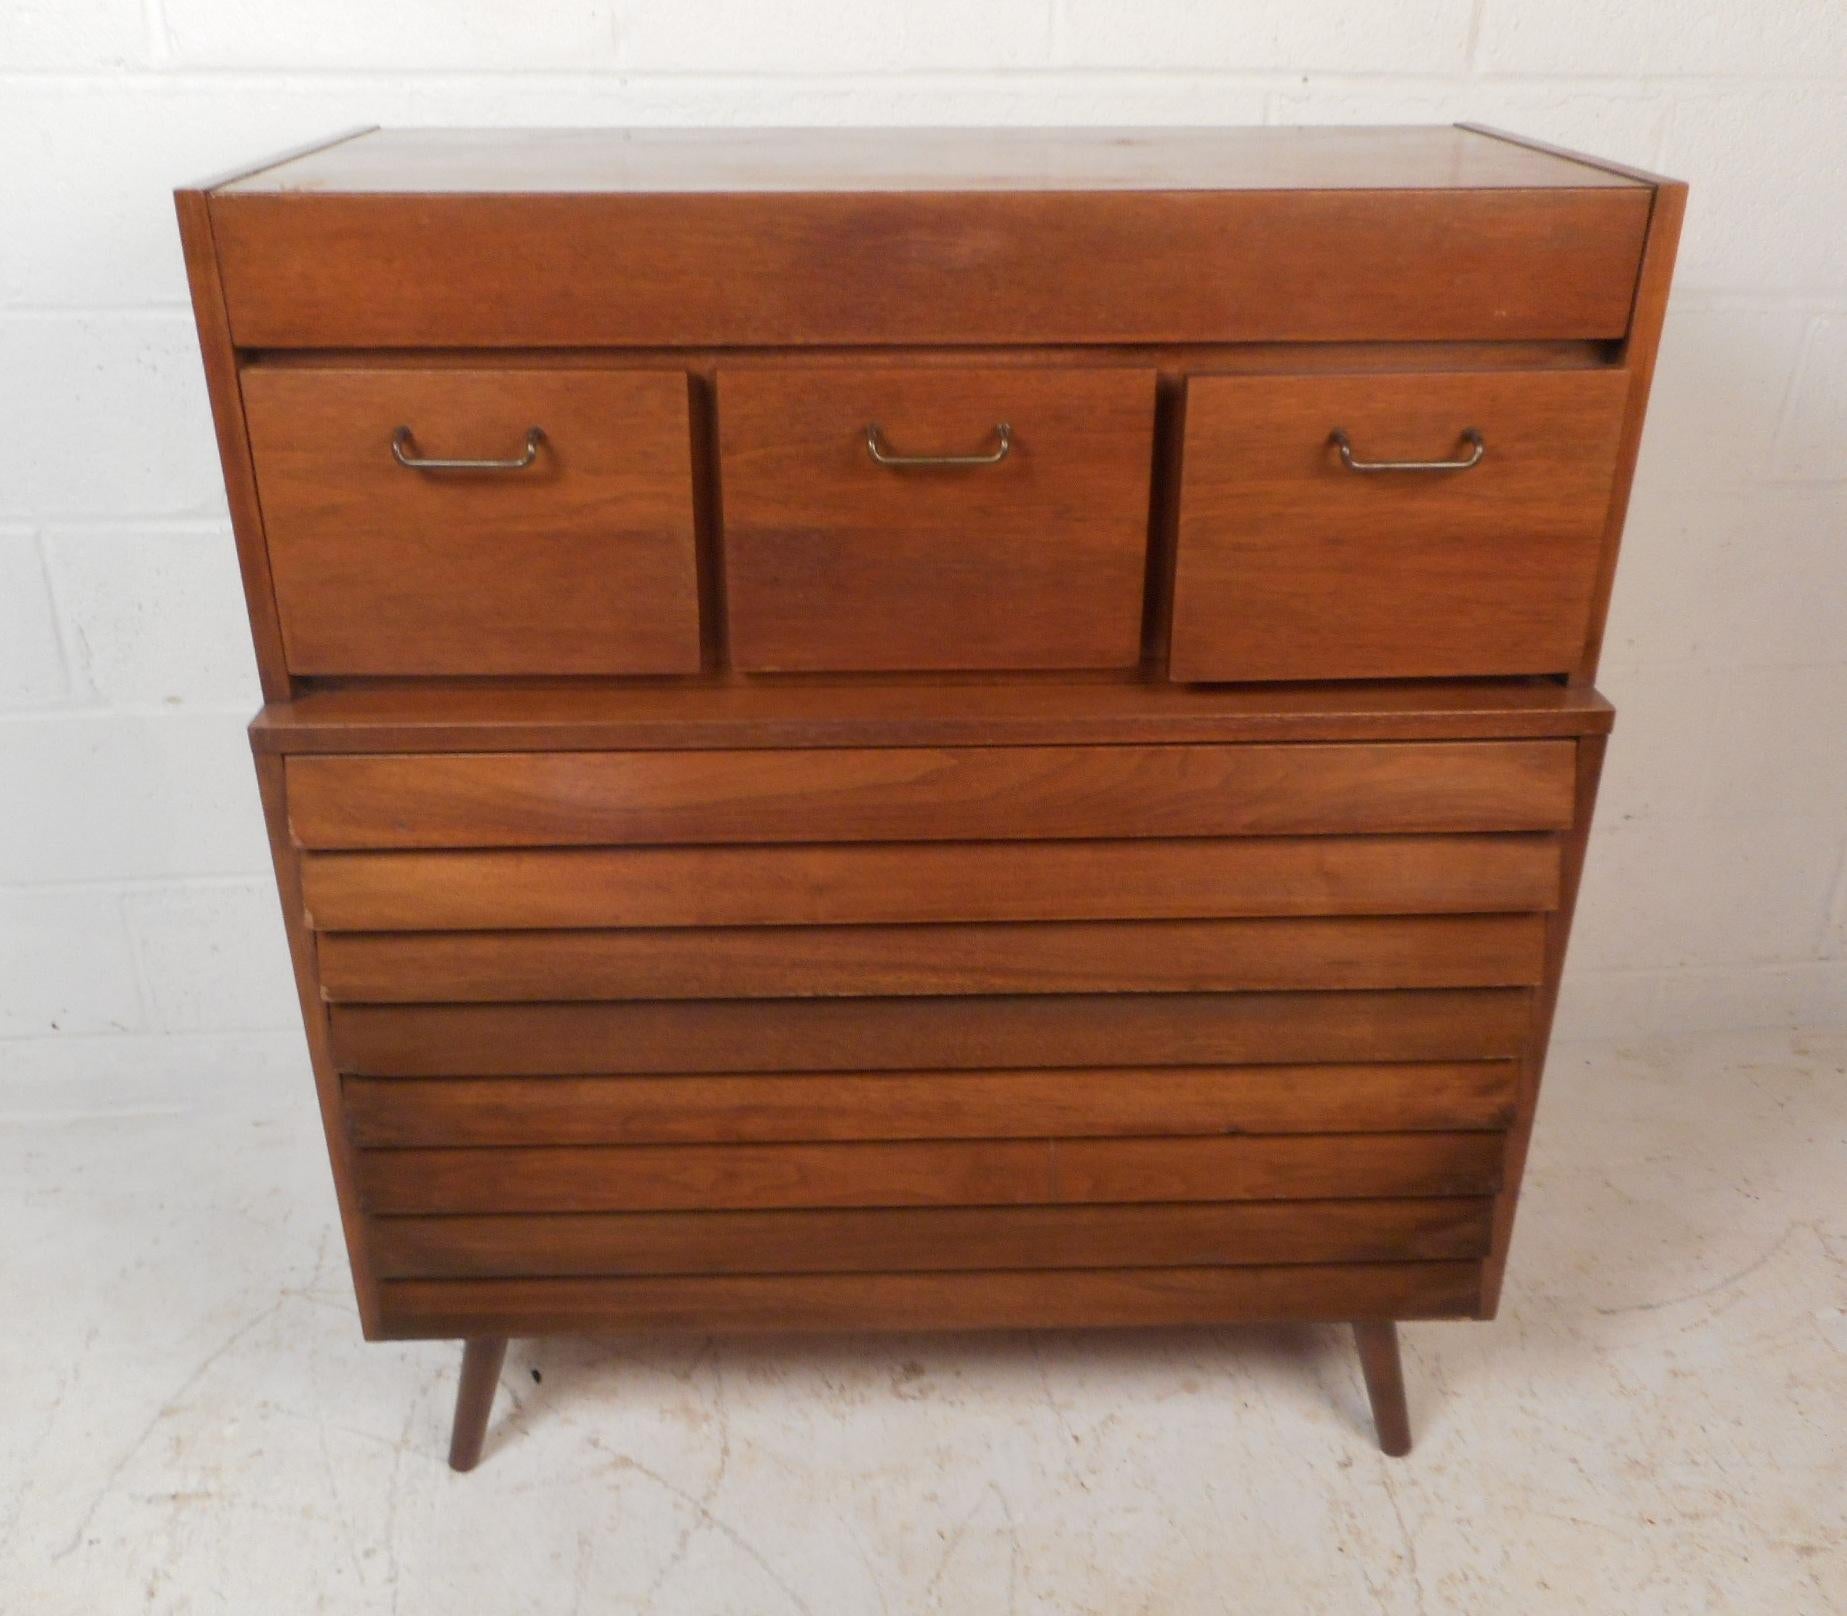 This beautiful vintage modern highboy dresser features seven drawers ensuring plenty of room for storage. A unique design with a hidden top drawer, bottom drawers with louvered fronts, and three unusual square drawers on the top with brass handles.